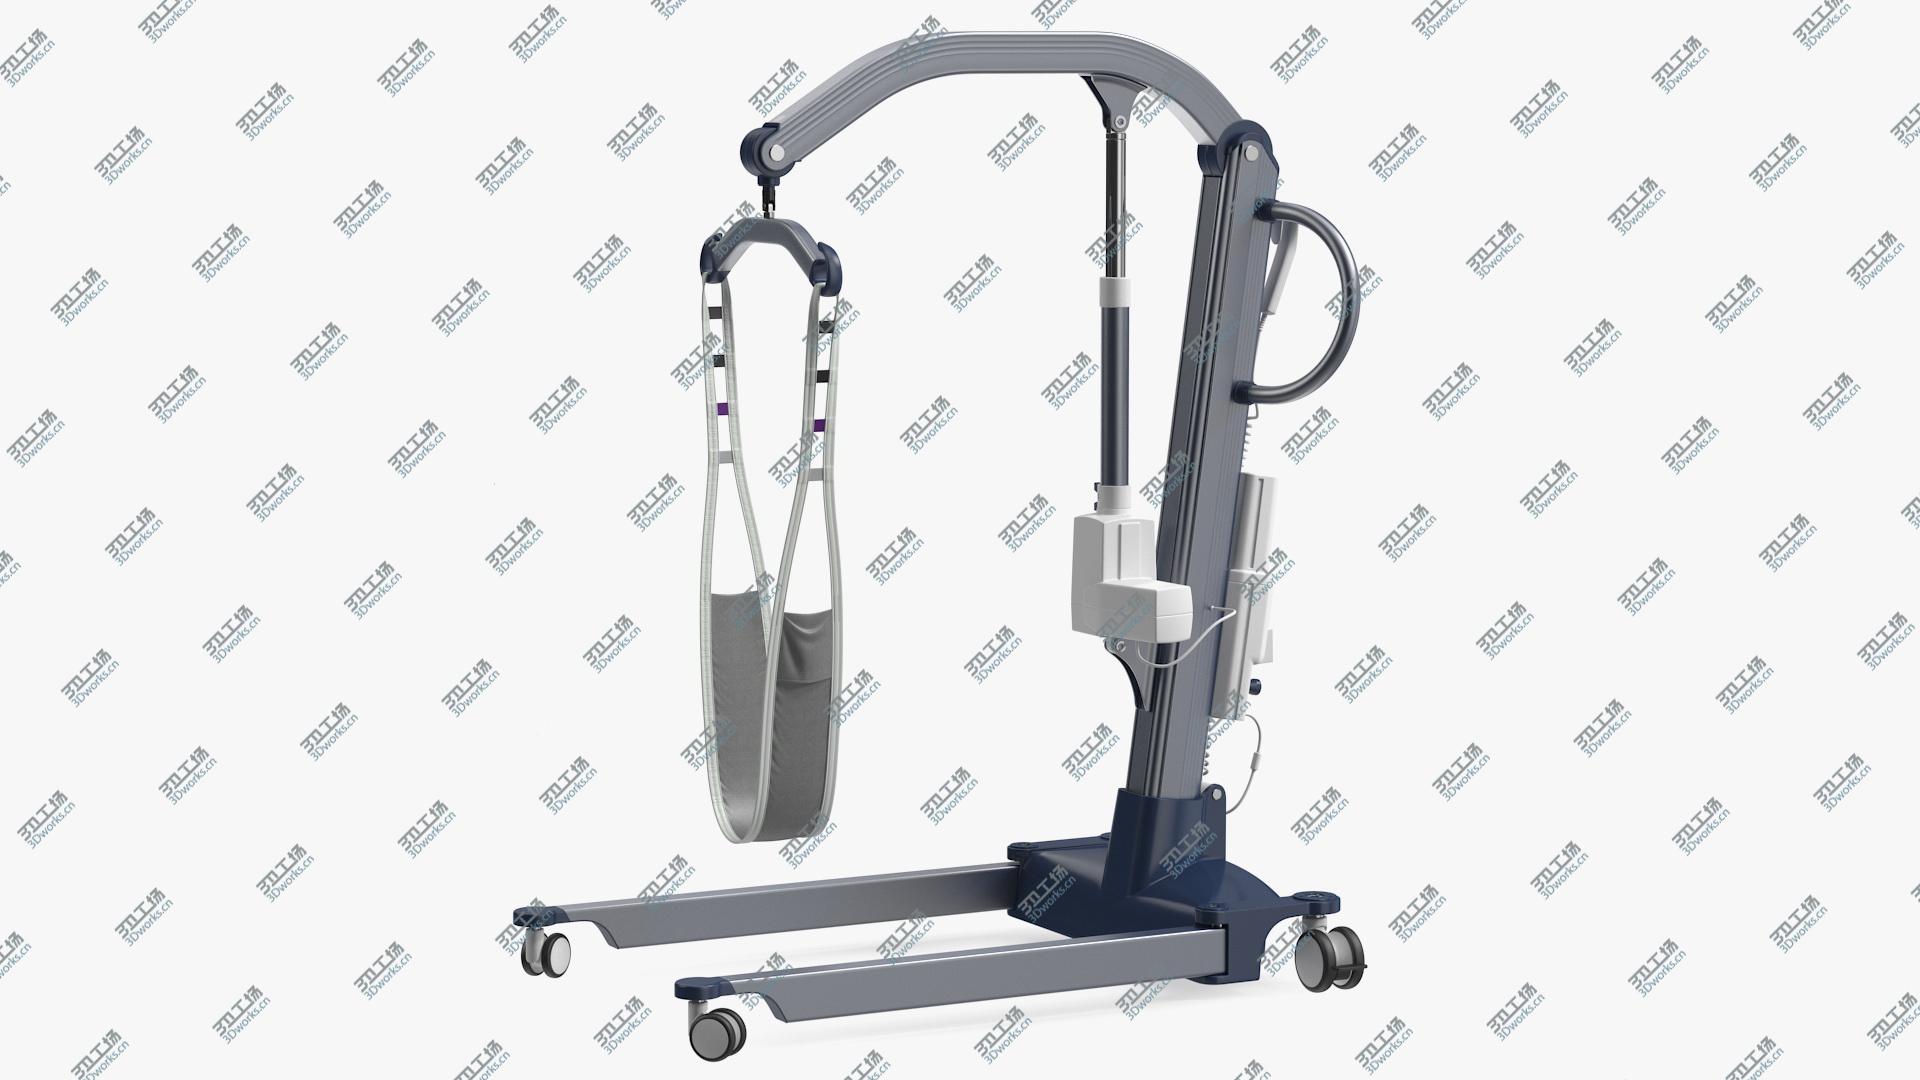 images/goods_img/202104091/Patient Lift with Leg Holder model/1.jpg